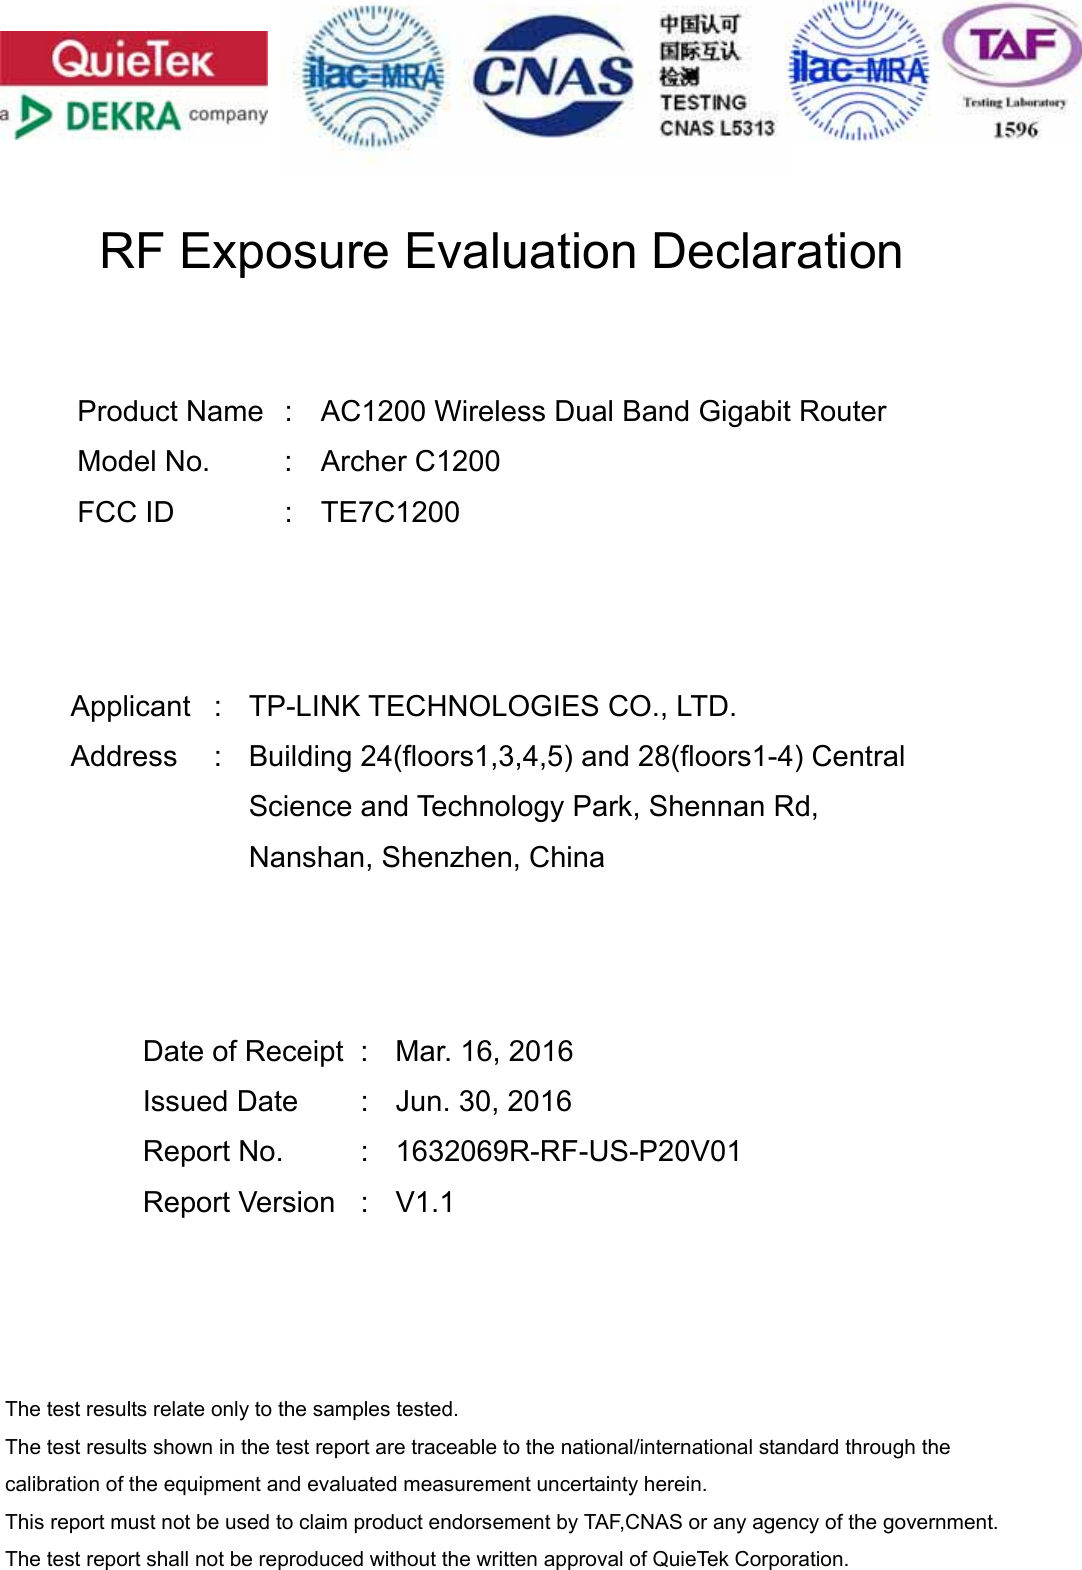      RF Exposure Evaluation Declaration     Product Name  :  AC1200 Wireless Dual Band Gigabit Router Model No.  :  Archer C1200 FCC ID  :  TE7C1200      Applicant :  TP-LINK TECHNOLOGIES CO., LTD. Address : Building 24(floors1,3,4,5) and 28(floors1-4) Central Science and Technology Park, Shennan Rd, Nanshan, Shenzhen, China      Date of Receipt  :  Mar. 16, 2016 Issued Date  :  Jun. 30, 2016 Report No.  :  1632069R-RF-US-P20V01 Report Version  :  V1.1     The test results relate only to the samples tested. The test results shown in the test report are traceable to the national/international standard through the calibration of the equipment and evaluated measurement uncertainty herein.   This report must not be used to claim product endorsement by TAF,CNAS or any agency of the government. The test report shall not be reproduced without the written approval of QuieTek Corporation. 